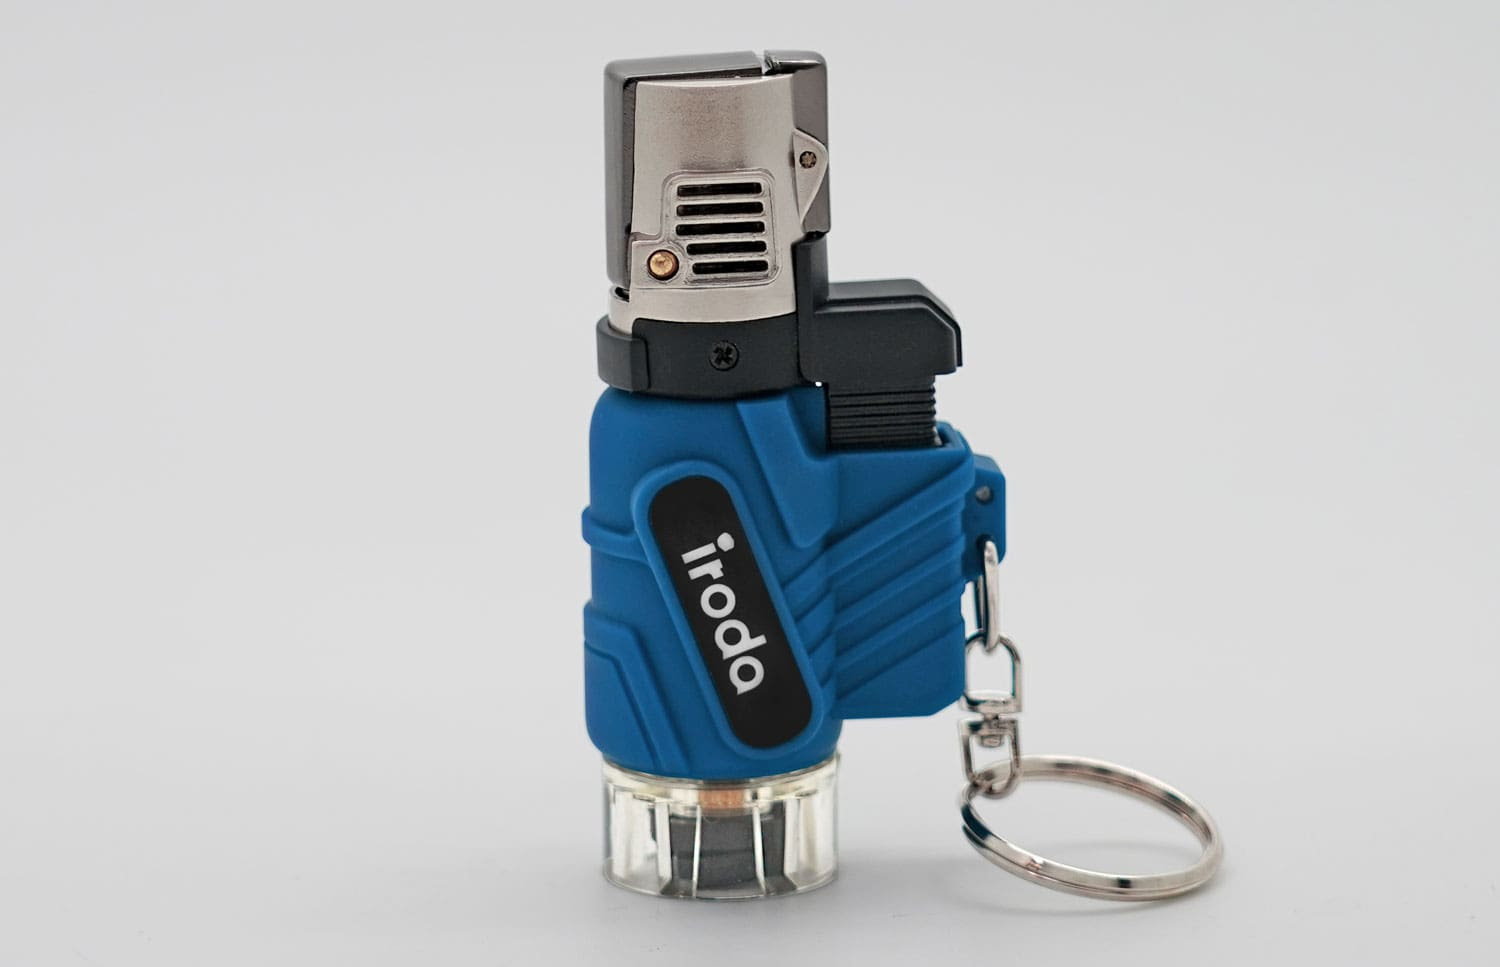 AT-2057 Micro butane jet lighter perfect for outdoors and adventures from Pro-Iroda in safety lock mode